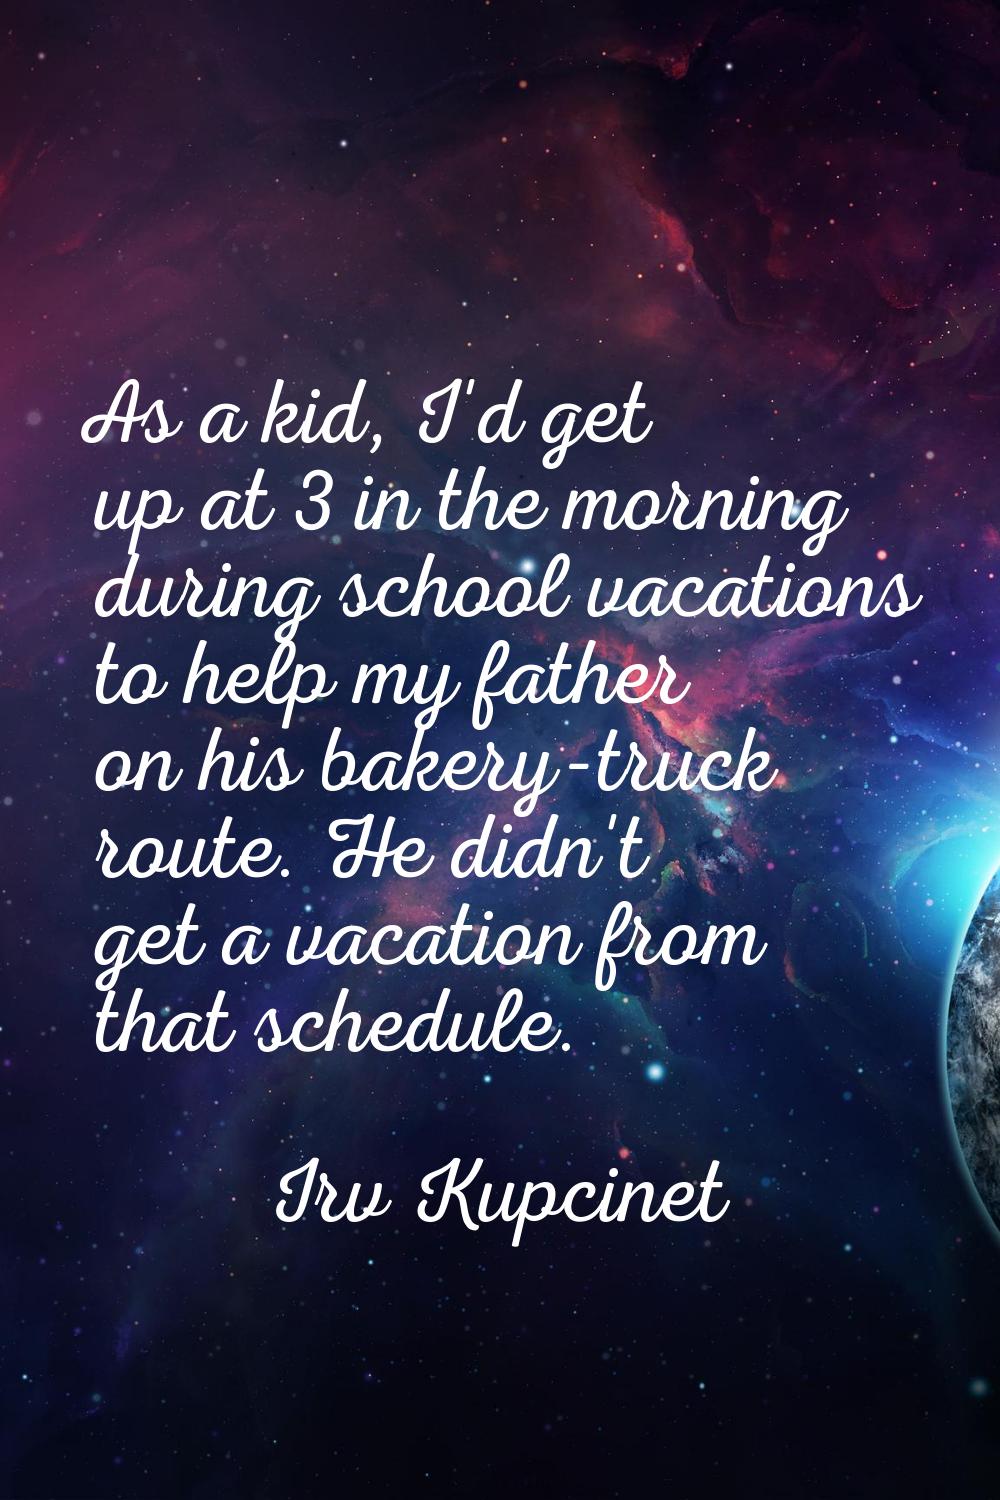 As a kid, I'd get up at 3 in the morning during school vacations to help my father on his bakery-tr